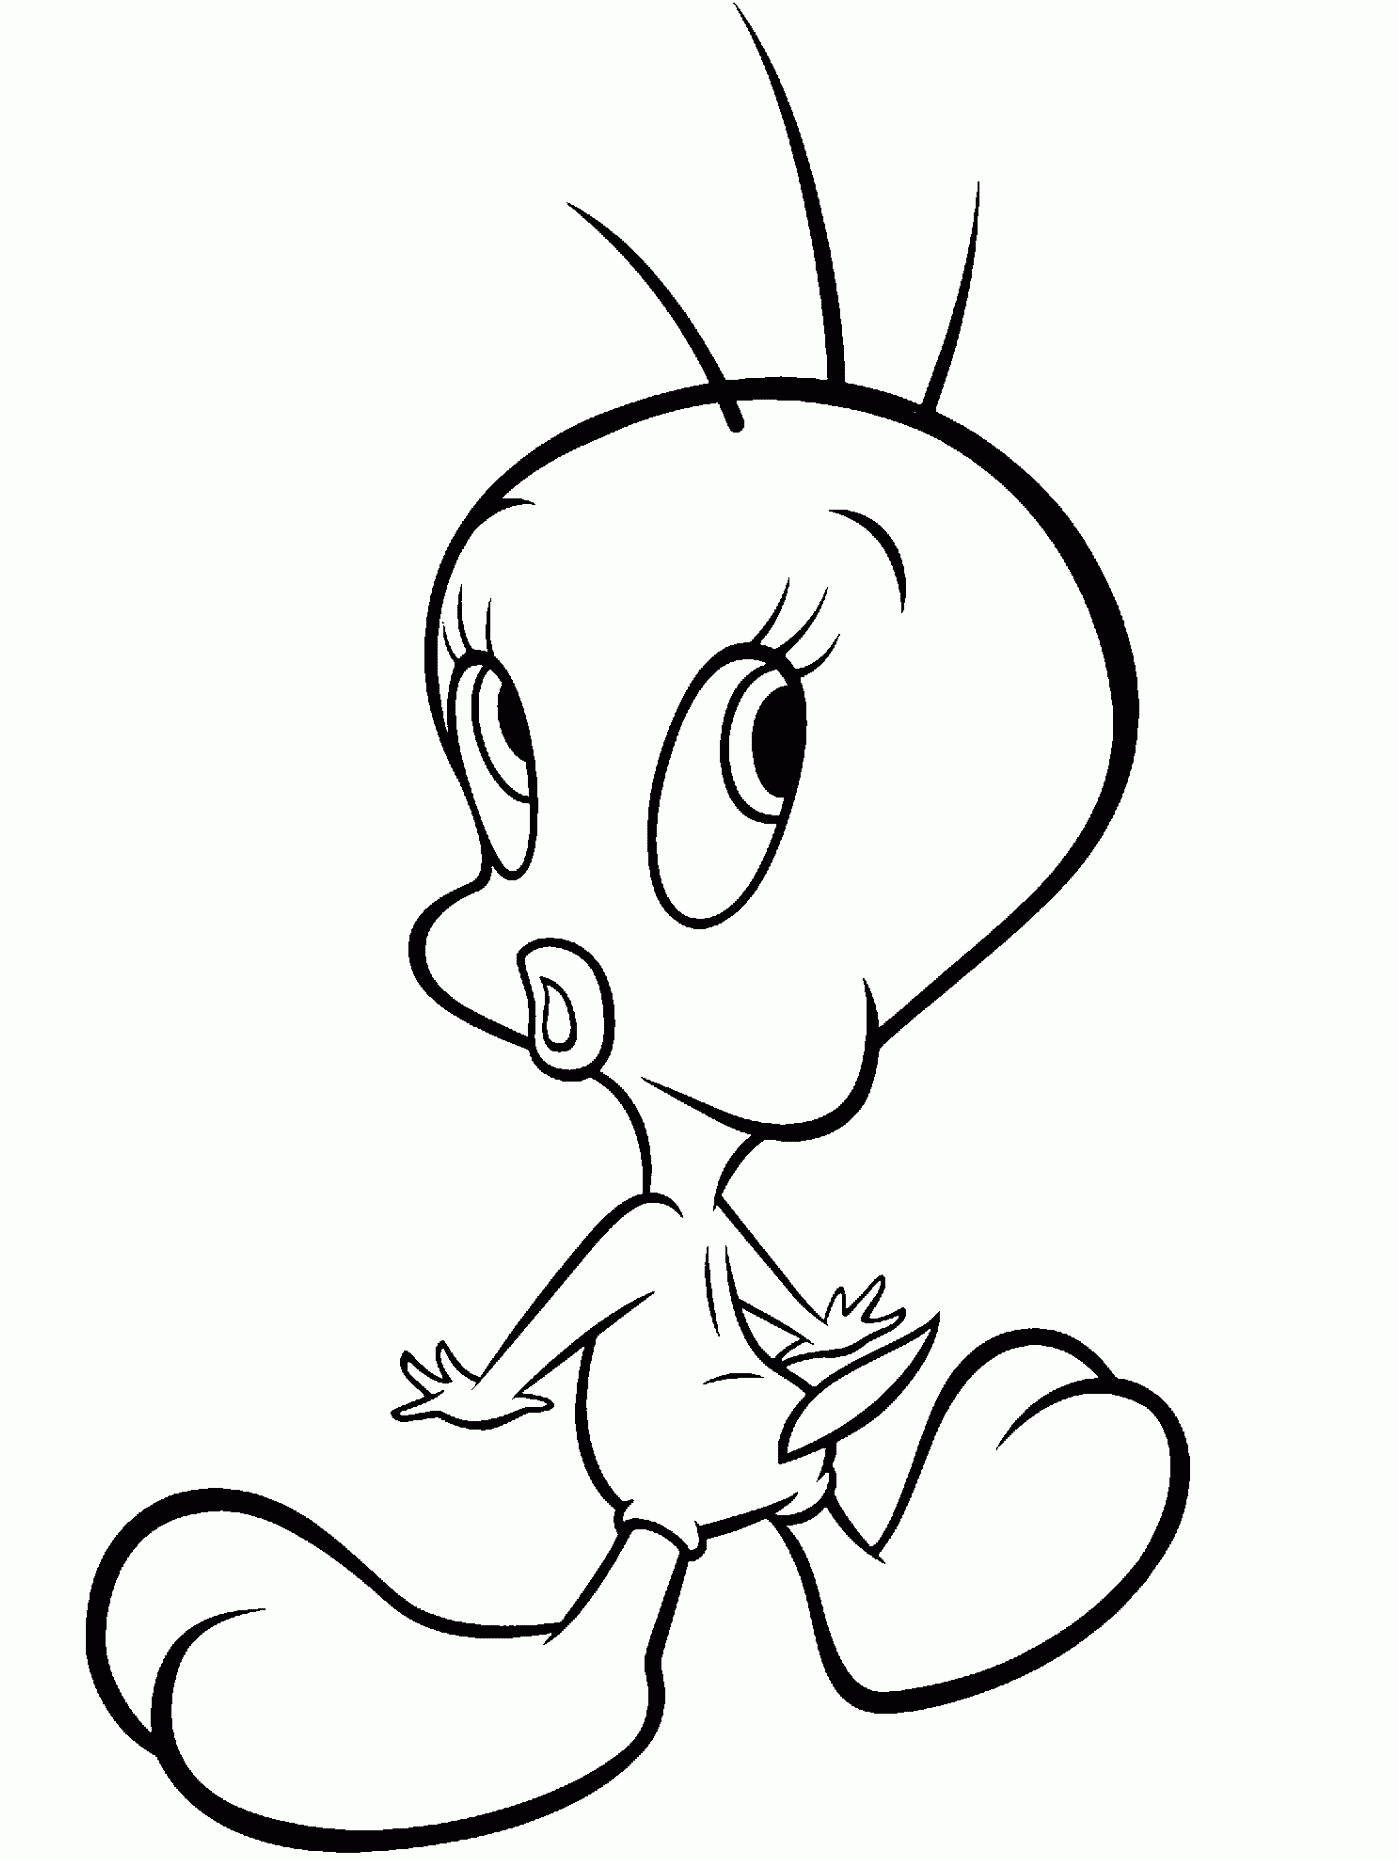 cartoons coloring pictures cartoons coloring pages getcoloringpagescom cartoons coloring pictures 